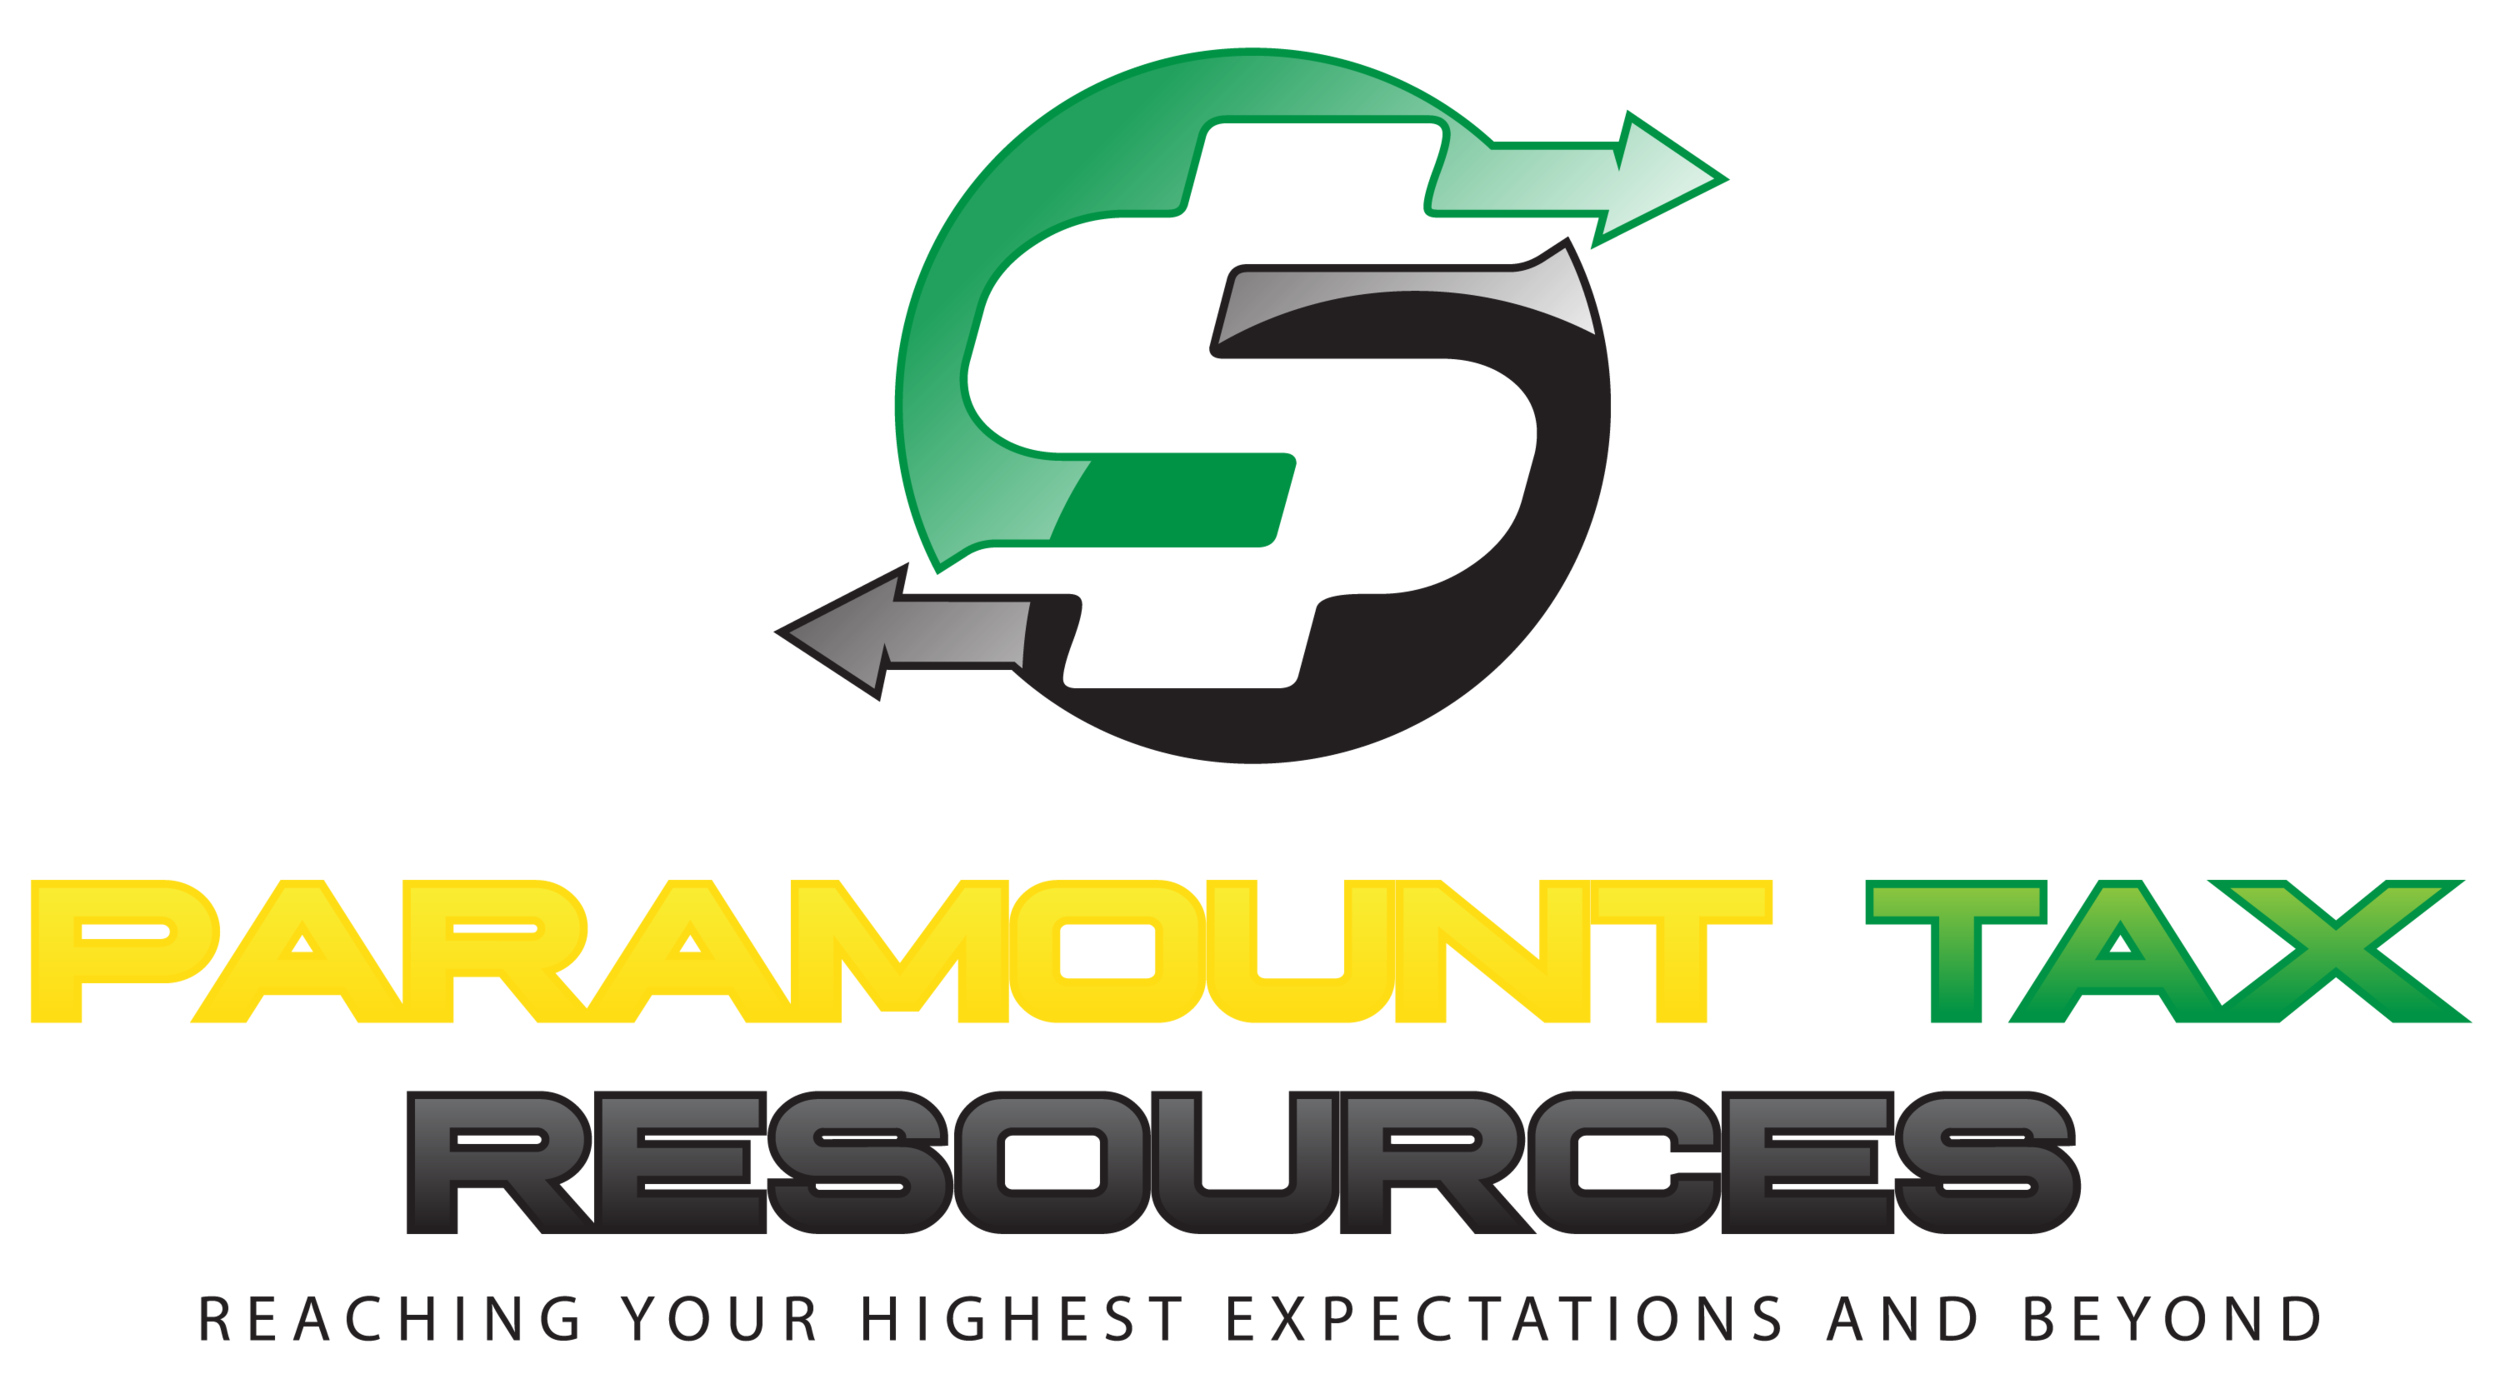 Paramount Tax Resources